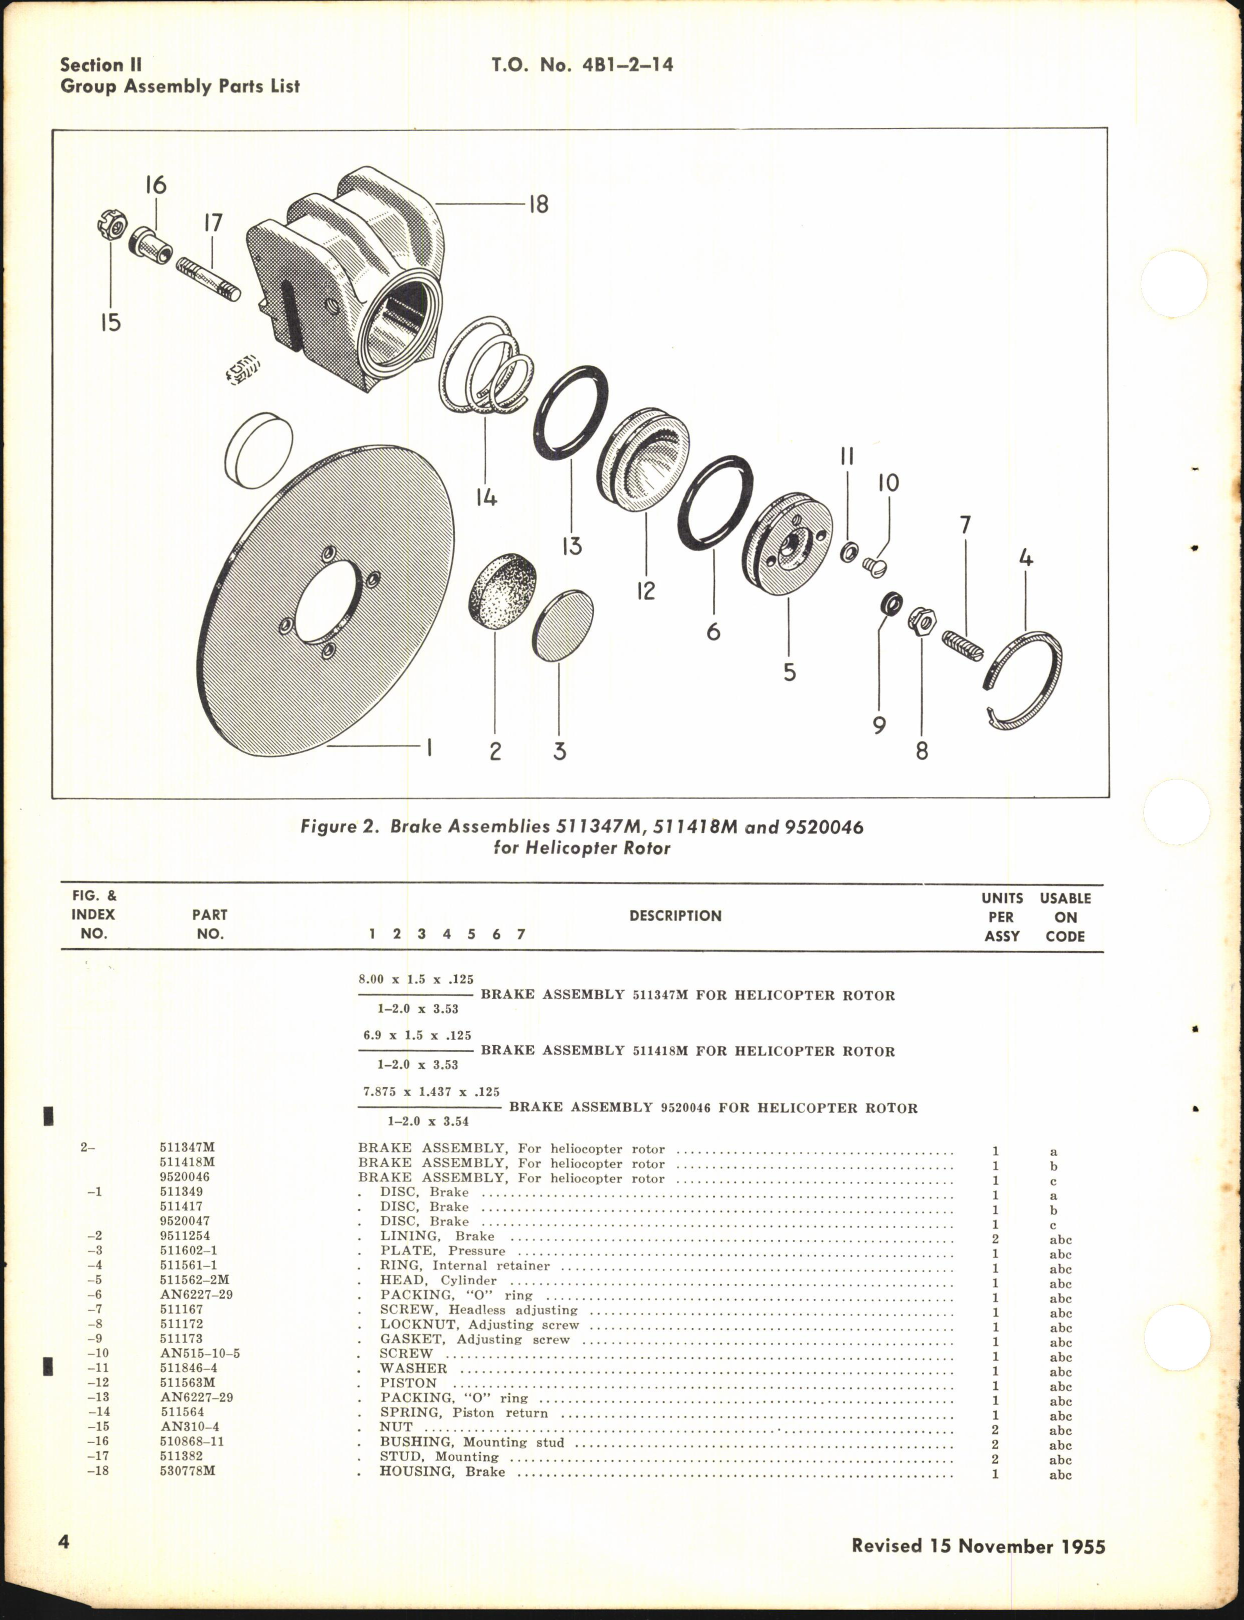 Sample page 8 from AirCorps Library document: Illustrated Parts Breakdown for Single and Dual Disc Brakes (Goodyear)